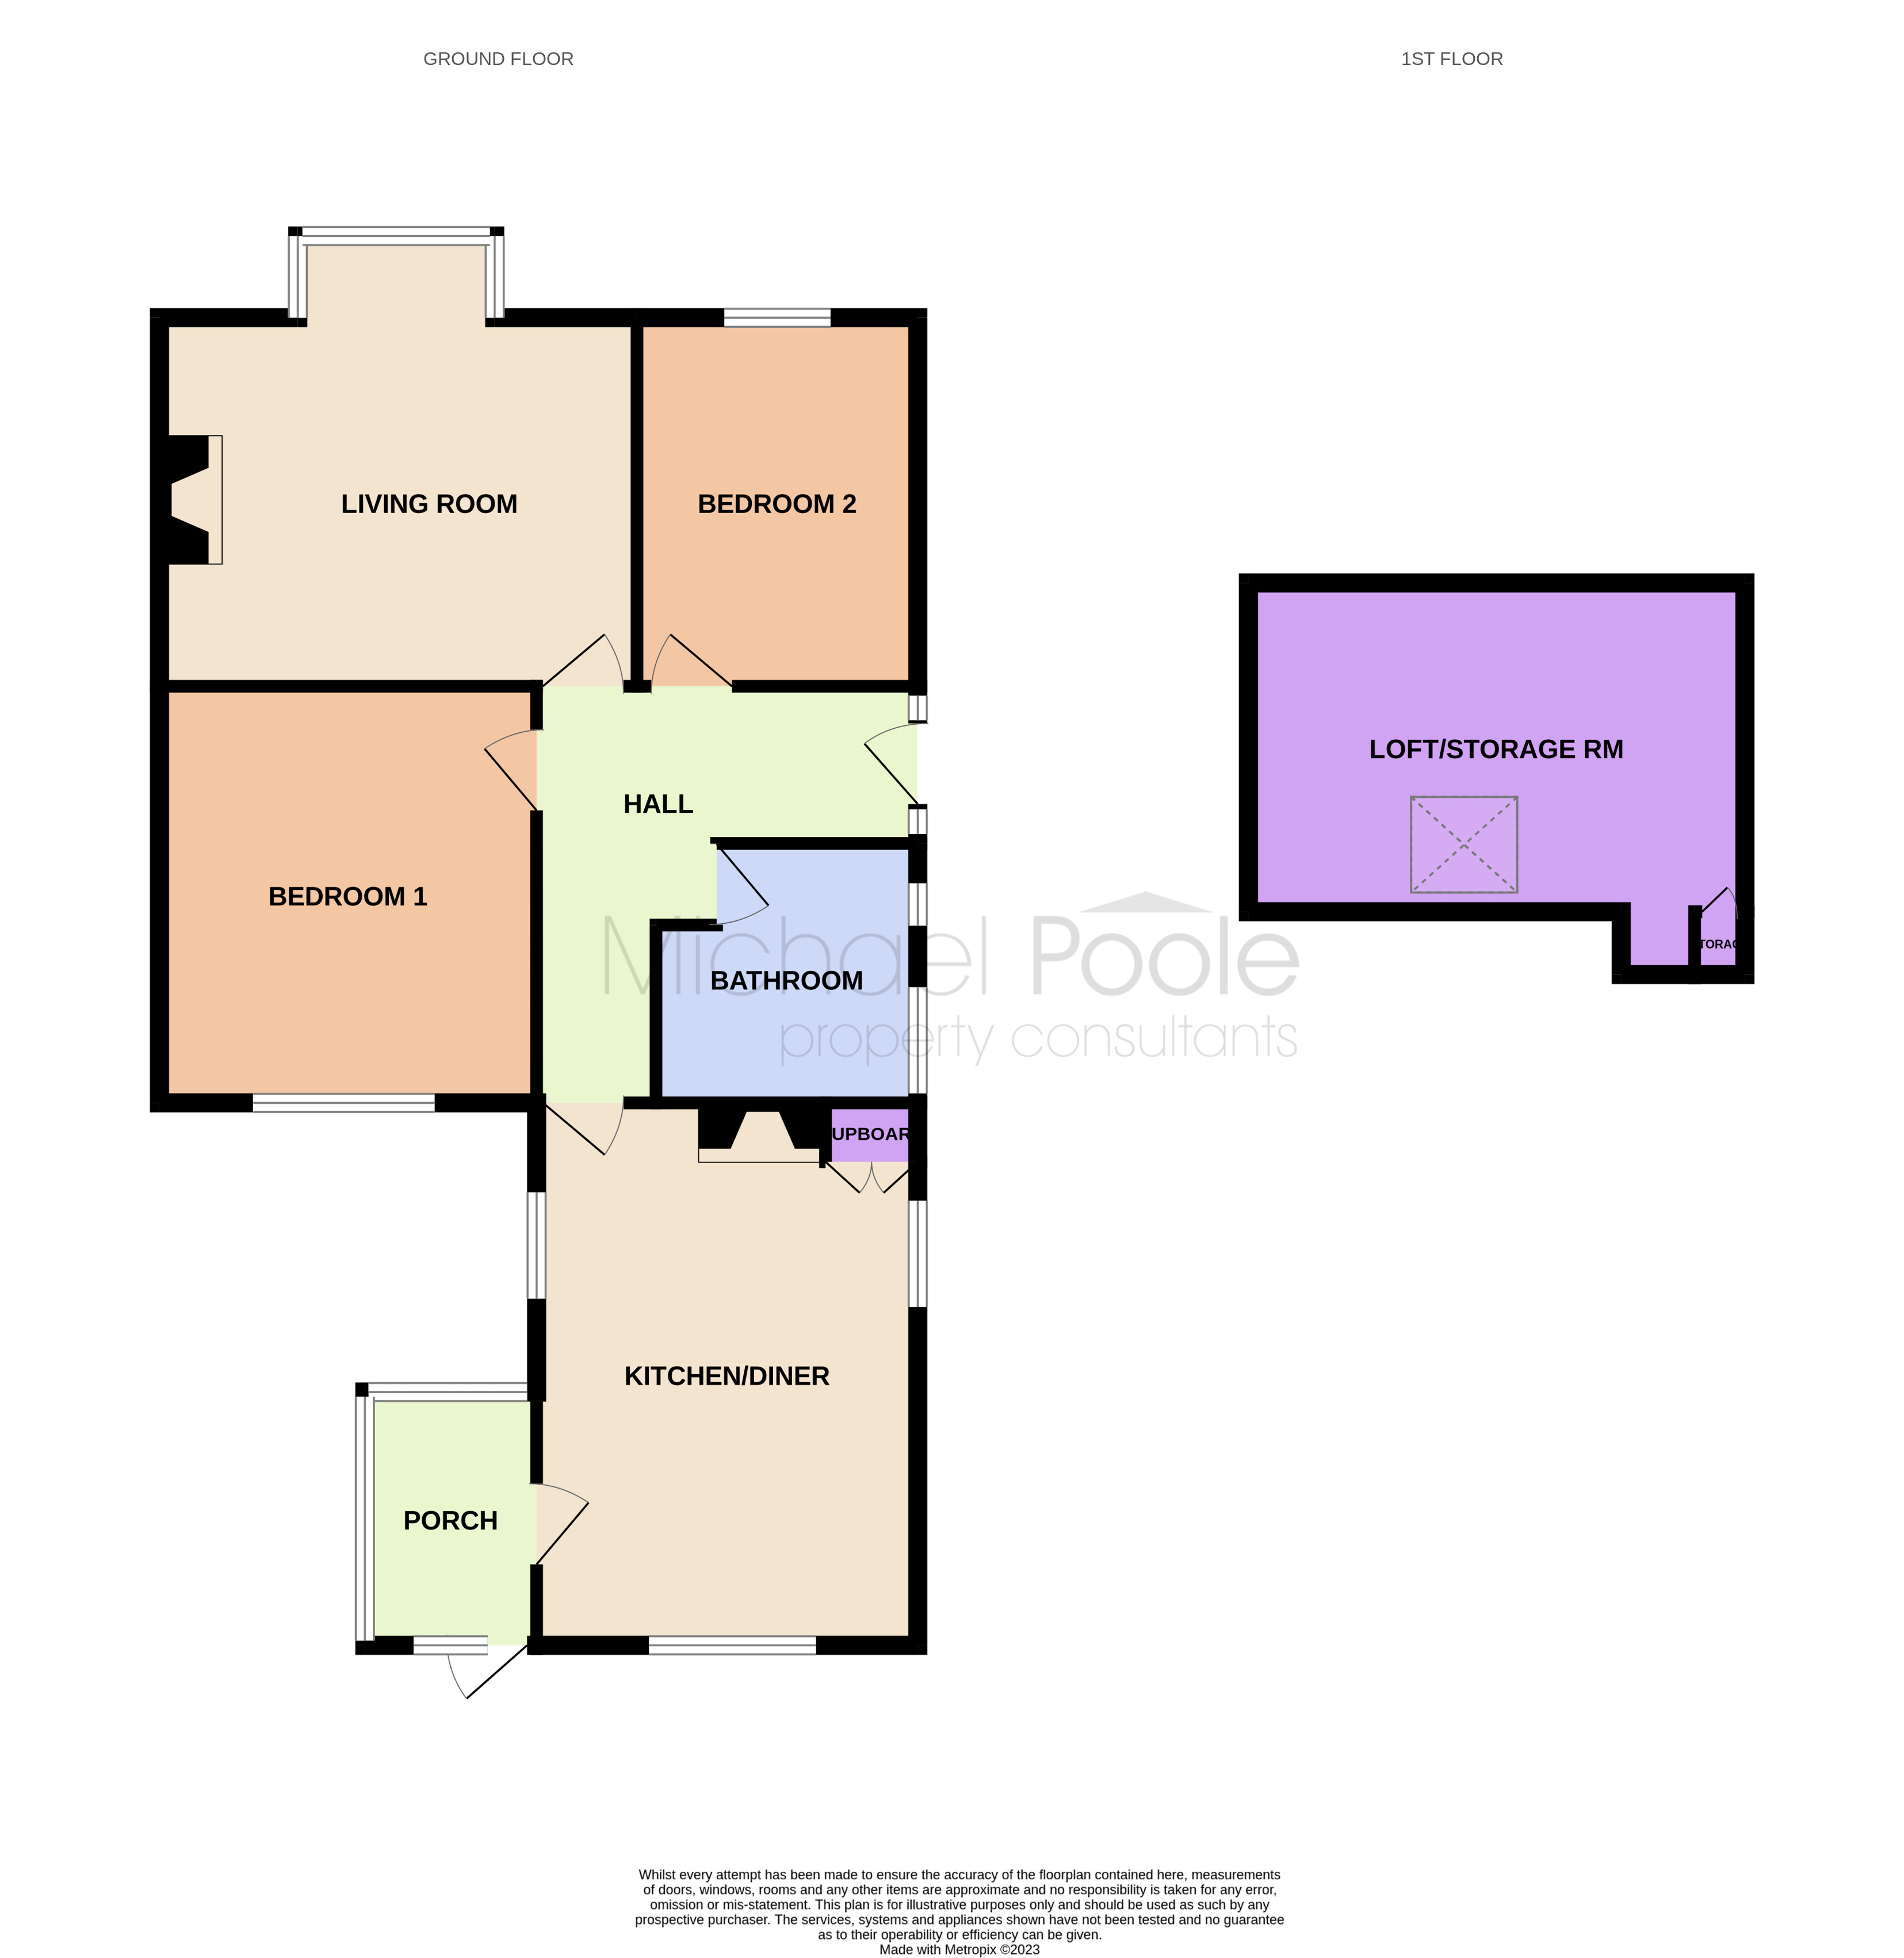 2 bed bungalow for sale - Property floorplan